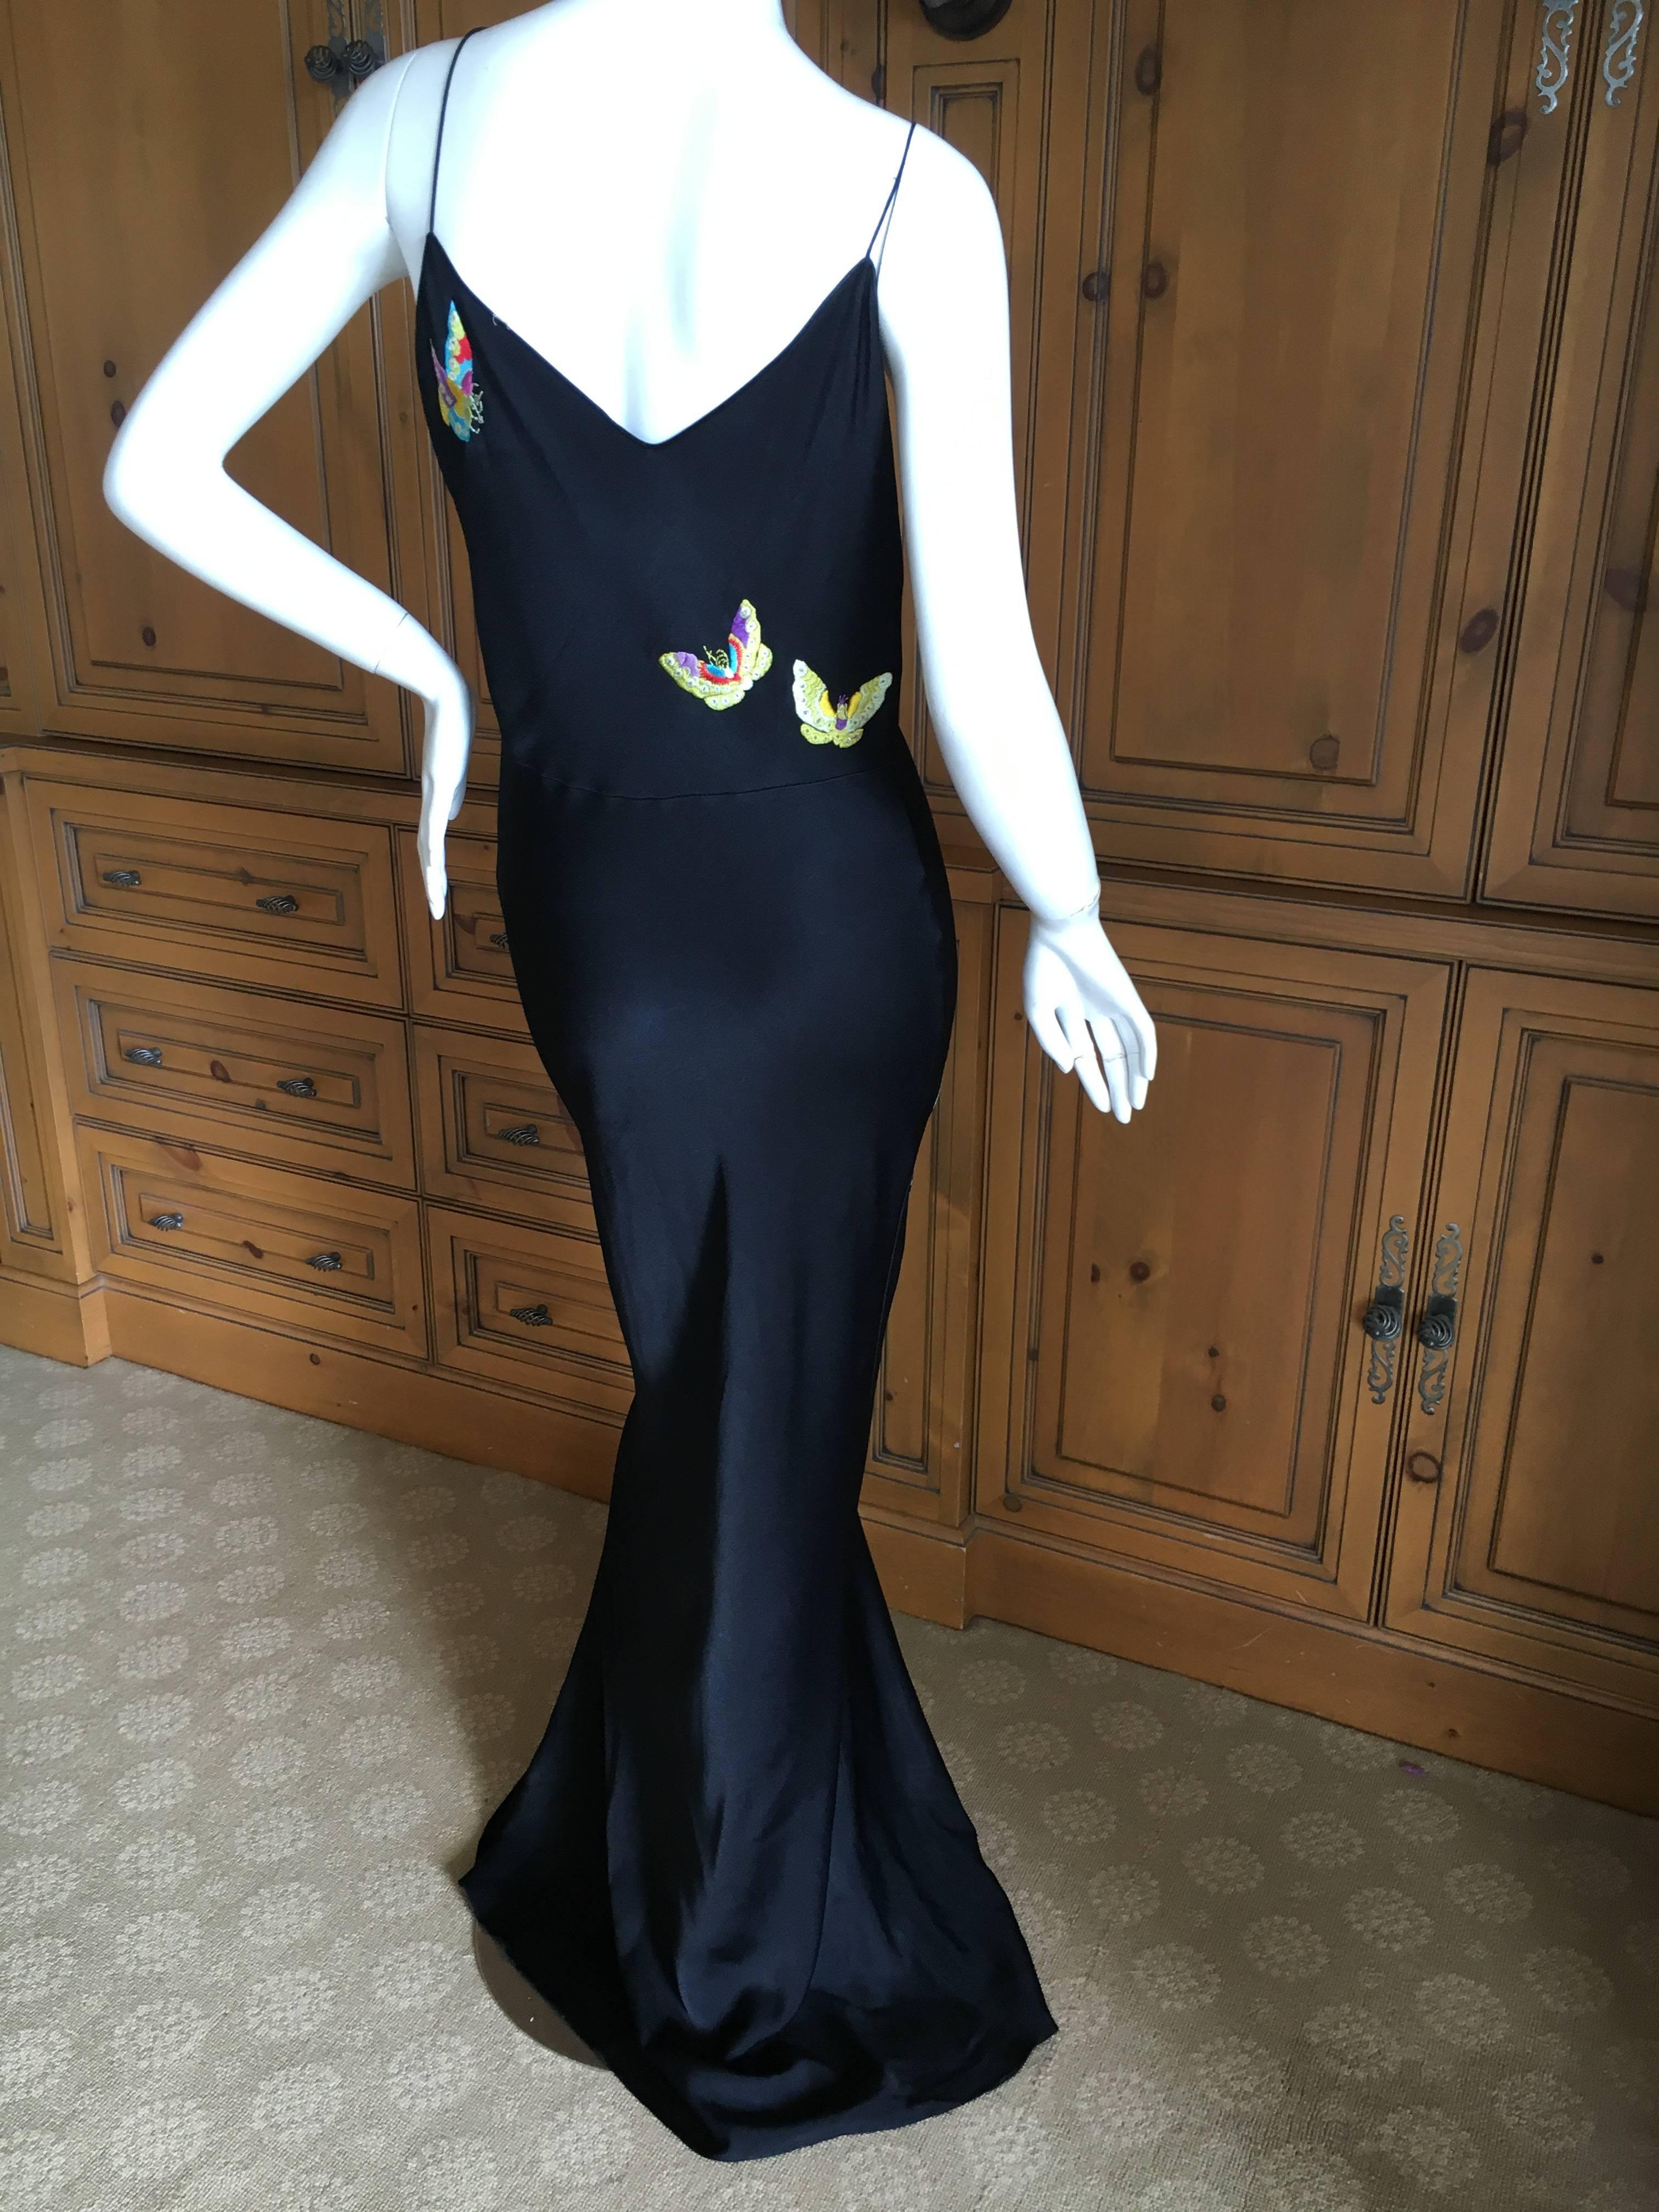 Beautiful long black dress with butterfly embroidery from John Galliano.
Size 44 / 10

Bust 44